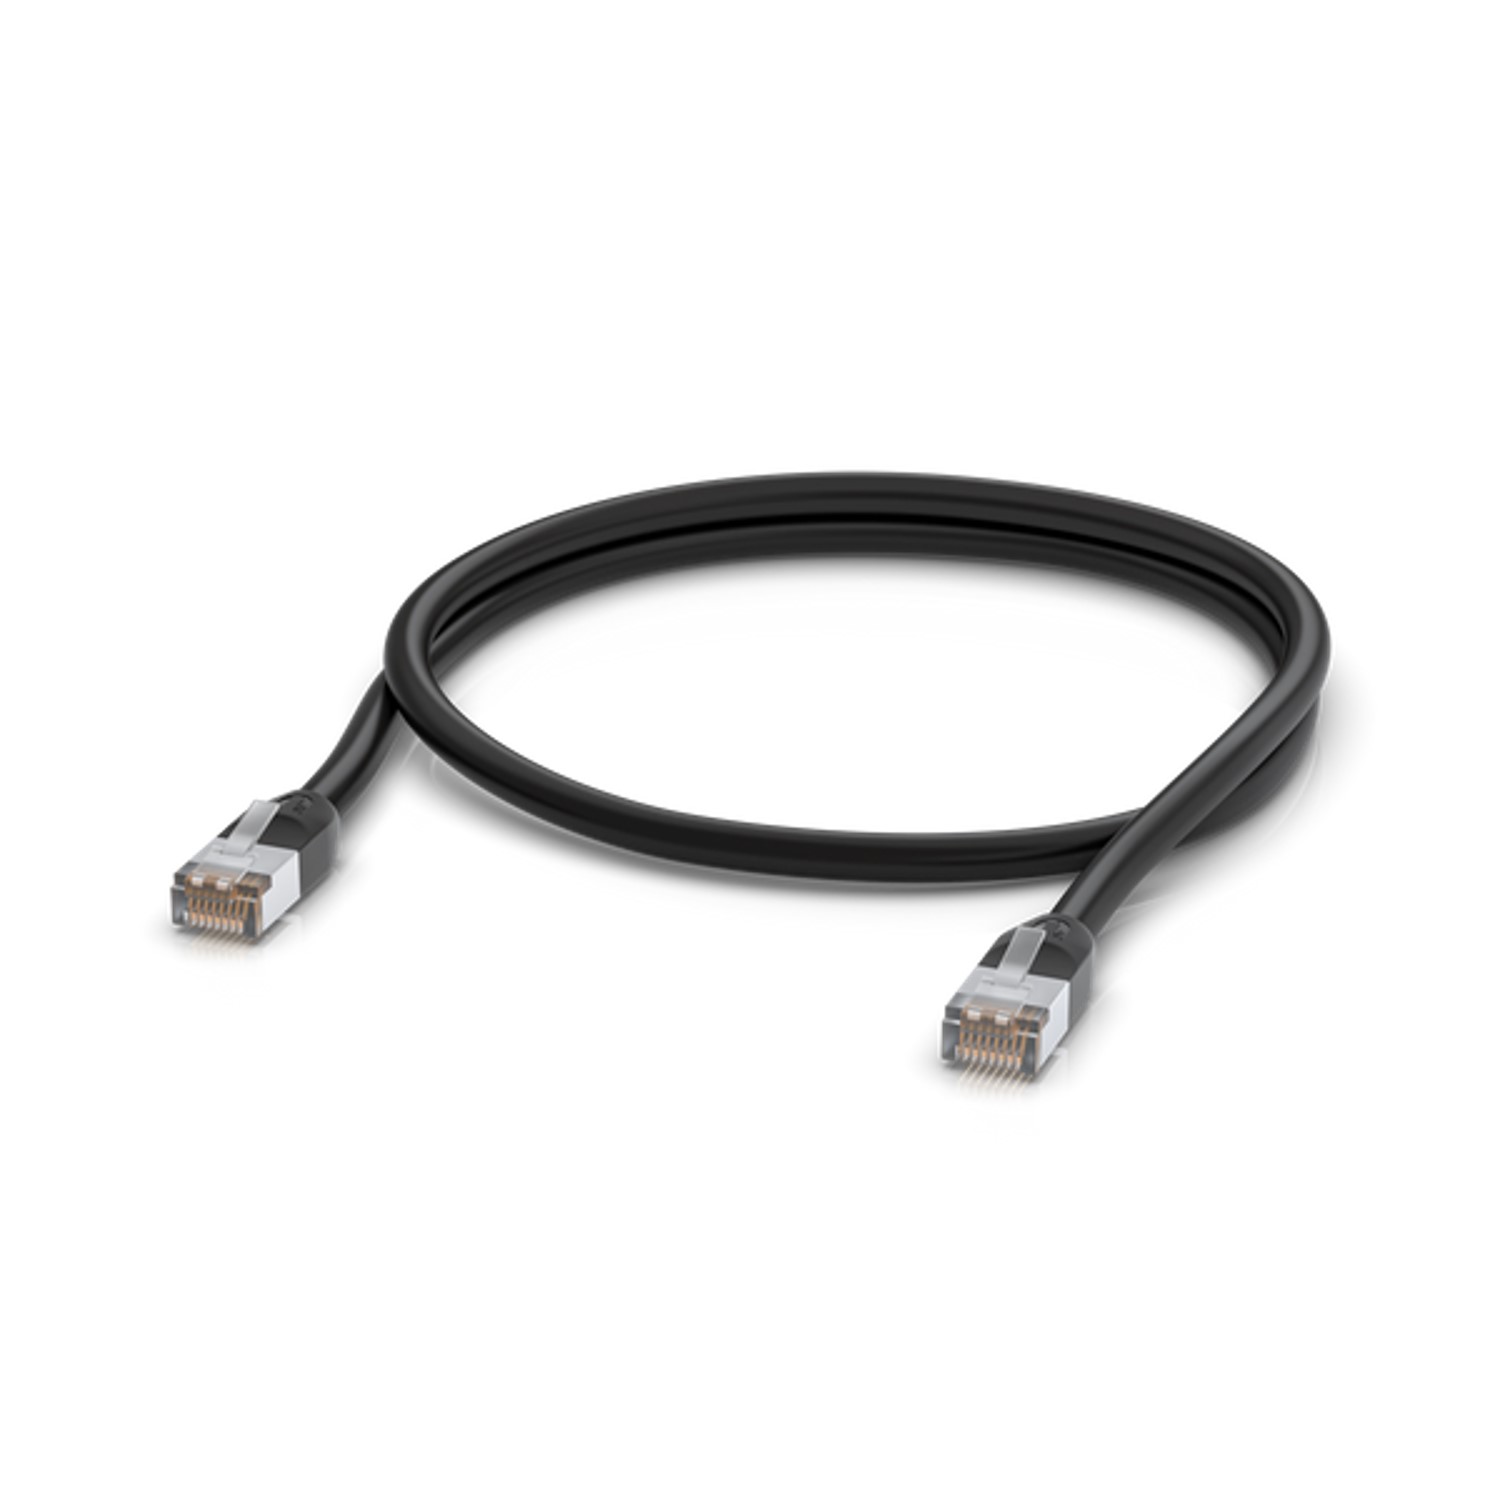 UACC-Cable-Patch-Outdoor-5M-BK | 5m Grounded, External CAT5e